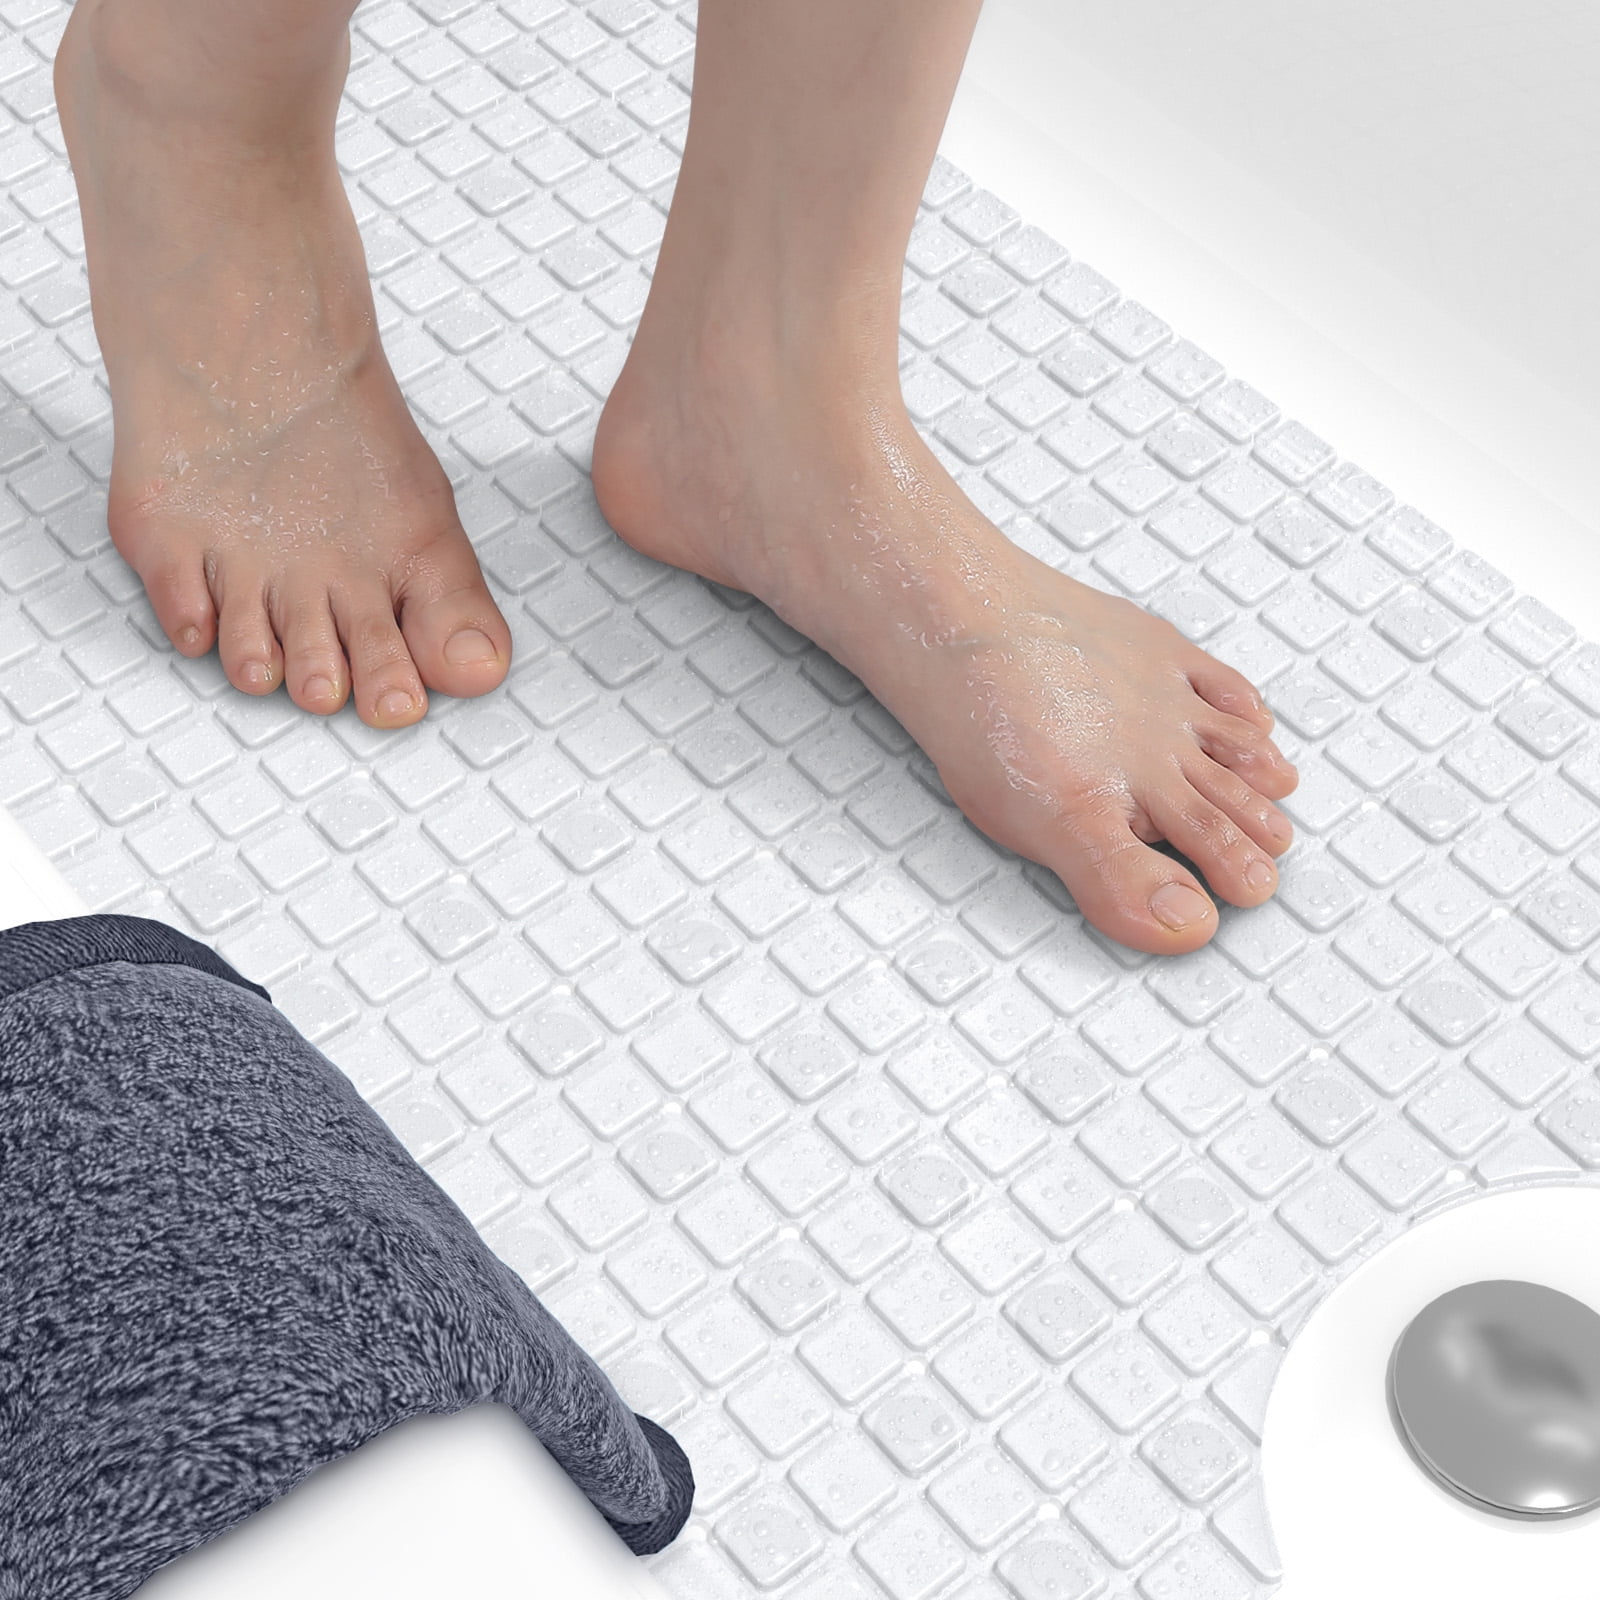 Gorilla Grip Anti-skid Bath Mats With Suction Cups And Drain Holes